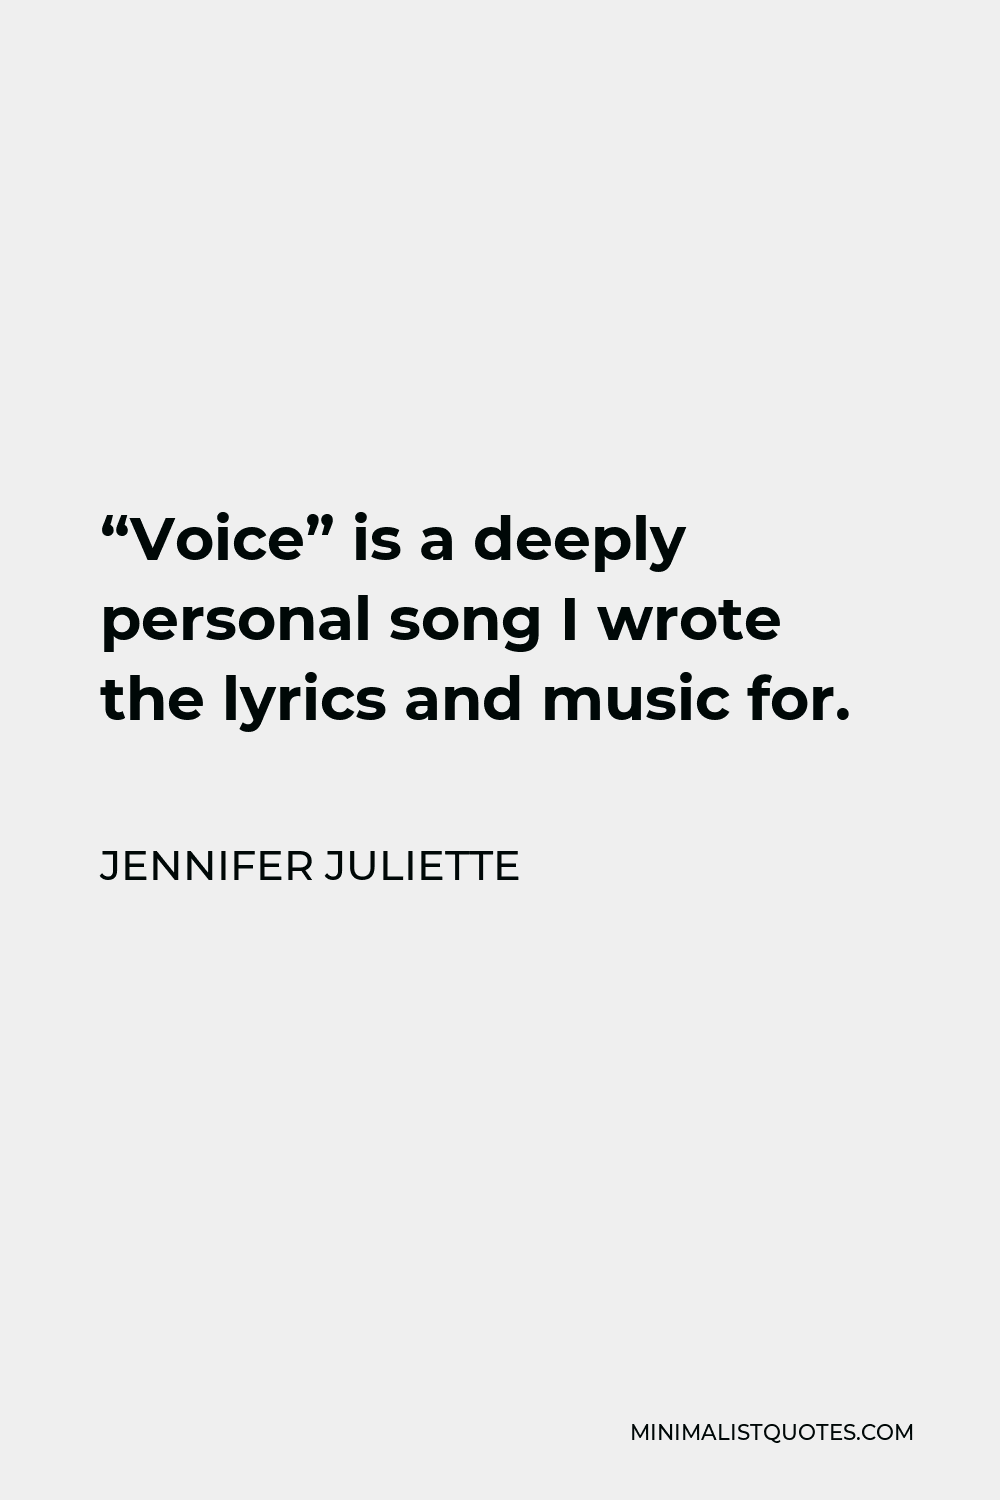 Jennifer Juliette Quote - “Small Voice” is a deeply personal song I wrote the lyrics and music for.